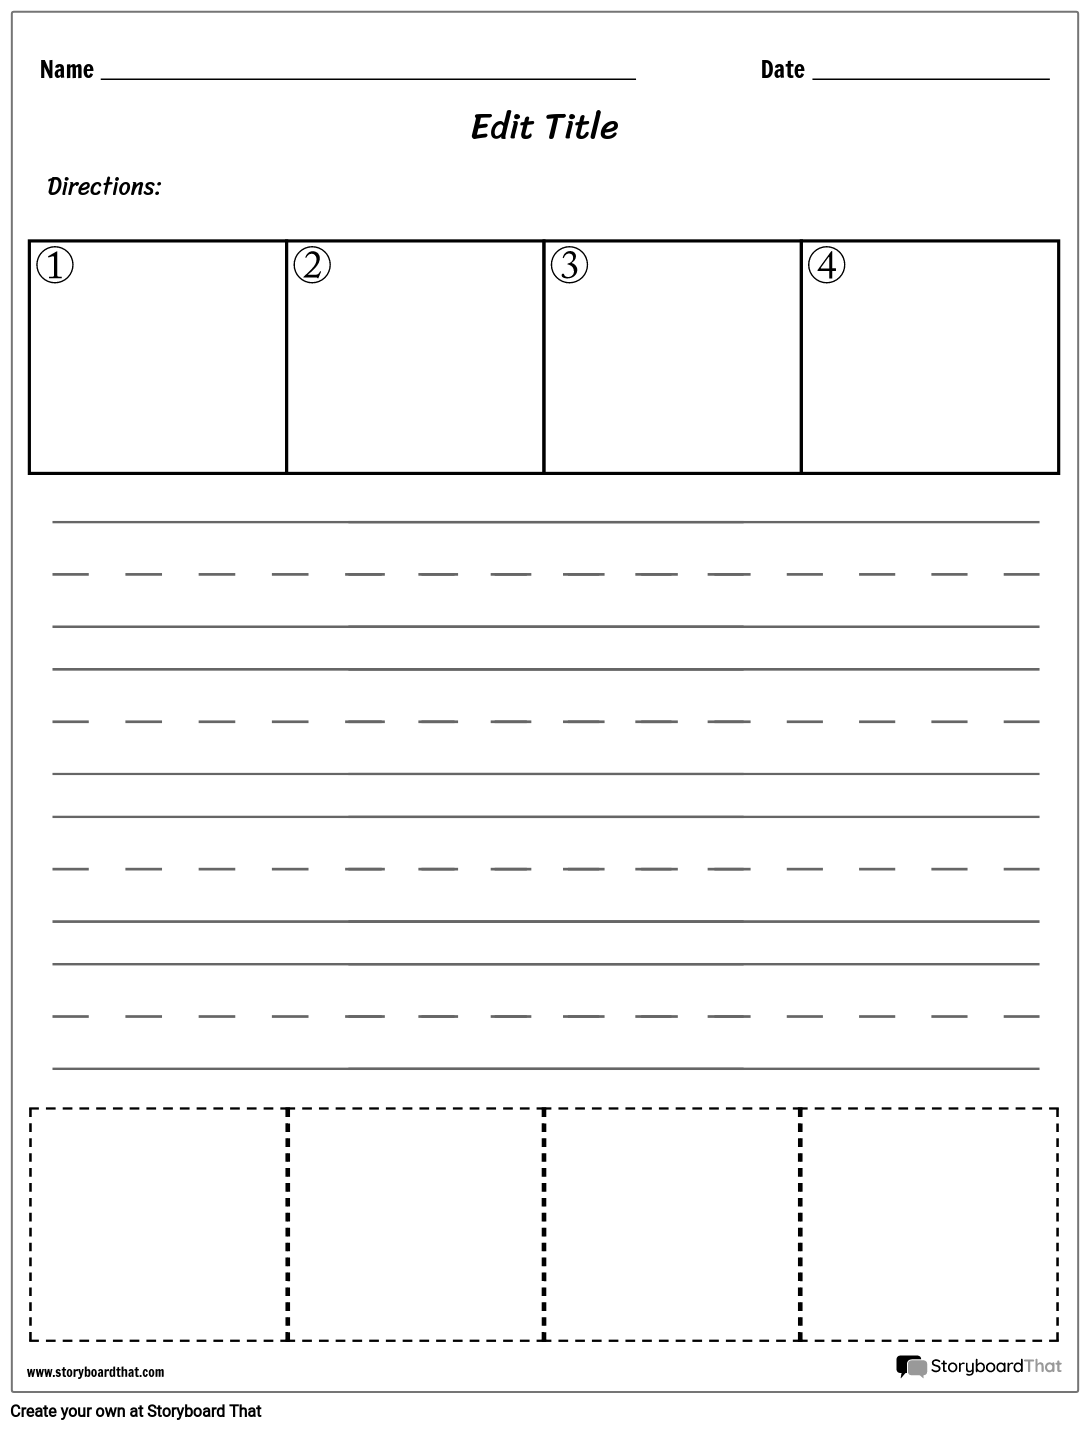 sequencing-worksheets-sequencing-writing-template-storyboardthat